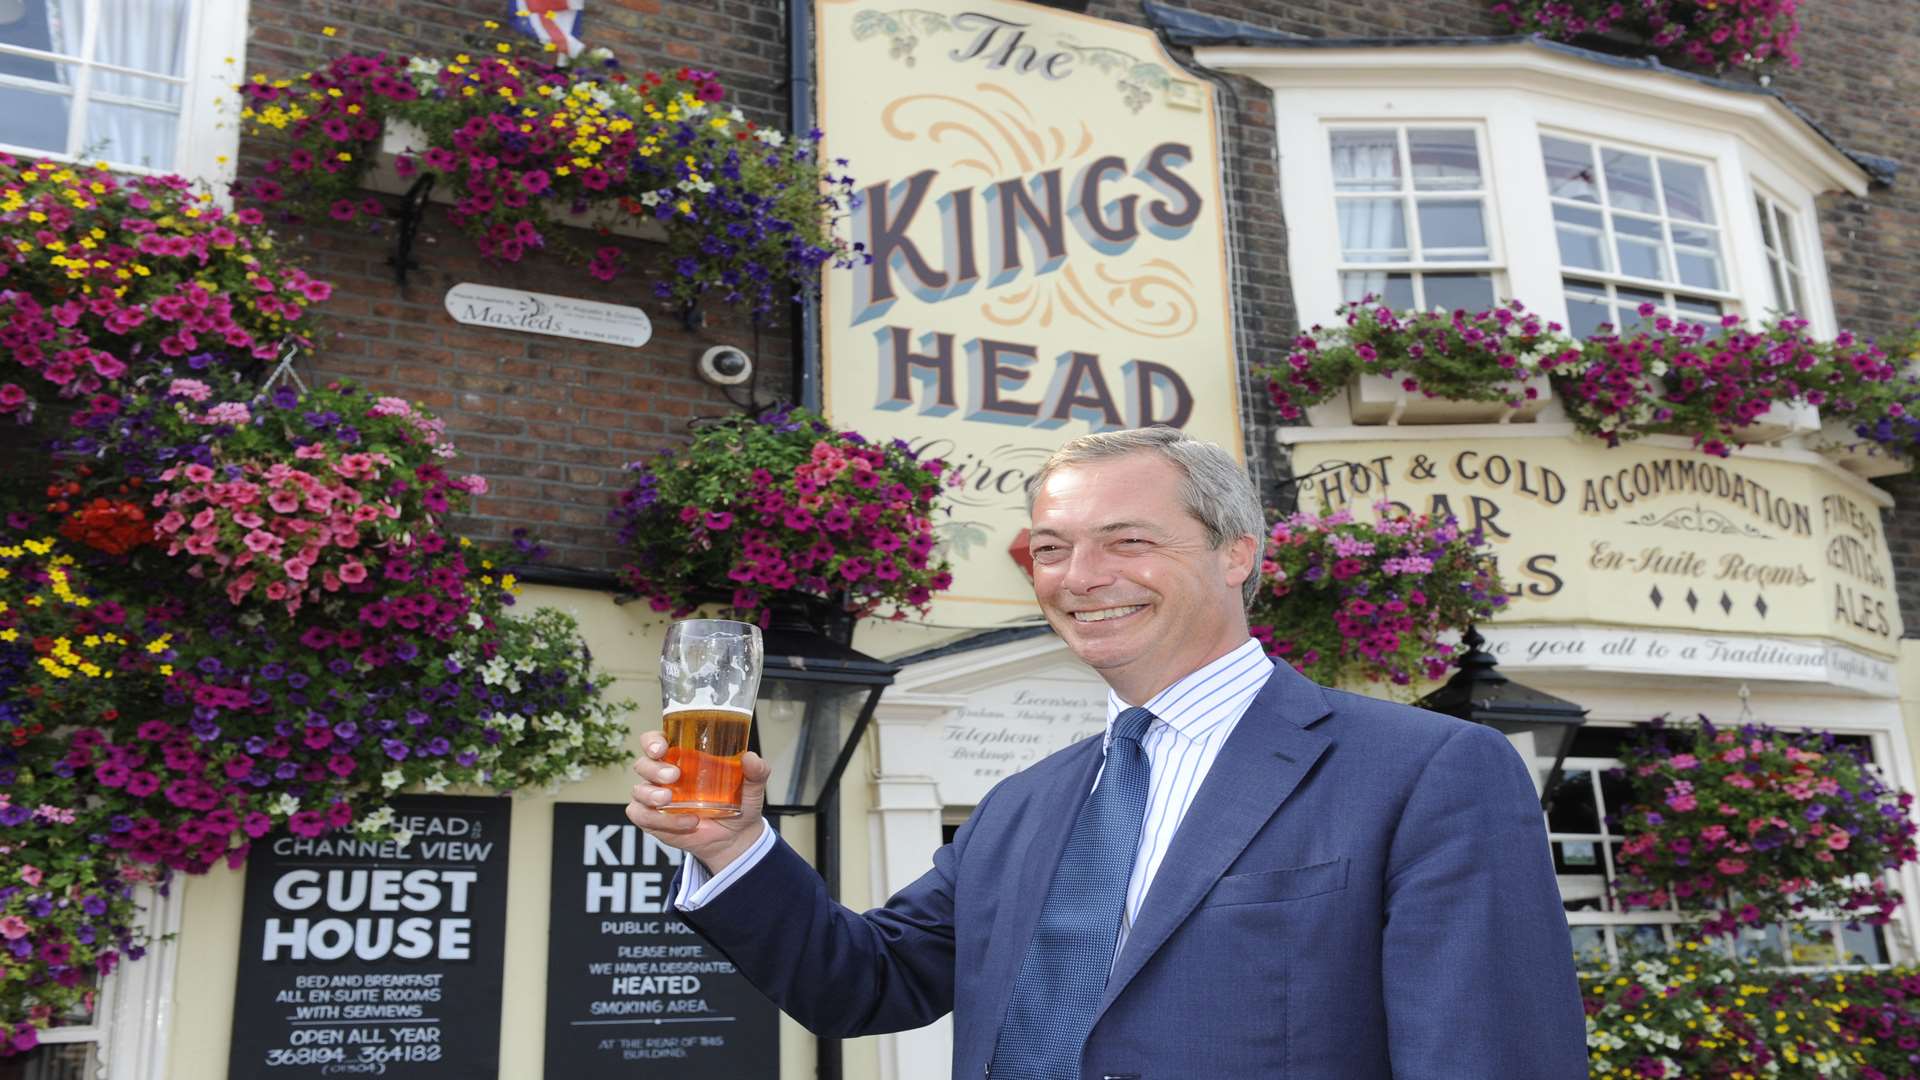 Nigel Farage tweeted a picture of himself outside the King's Head in August 2013